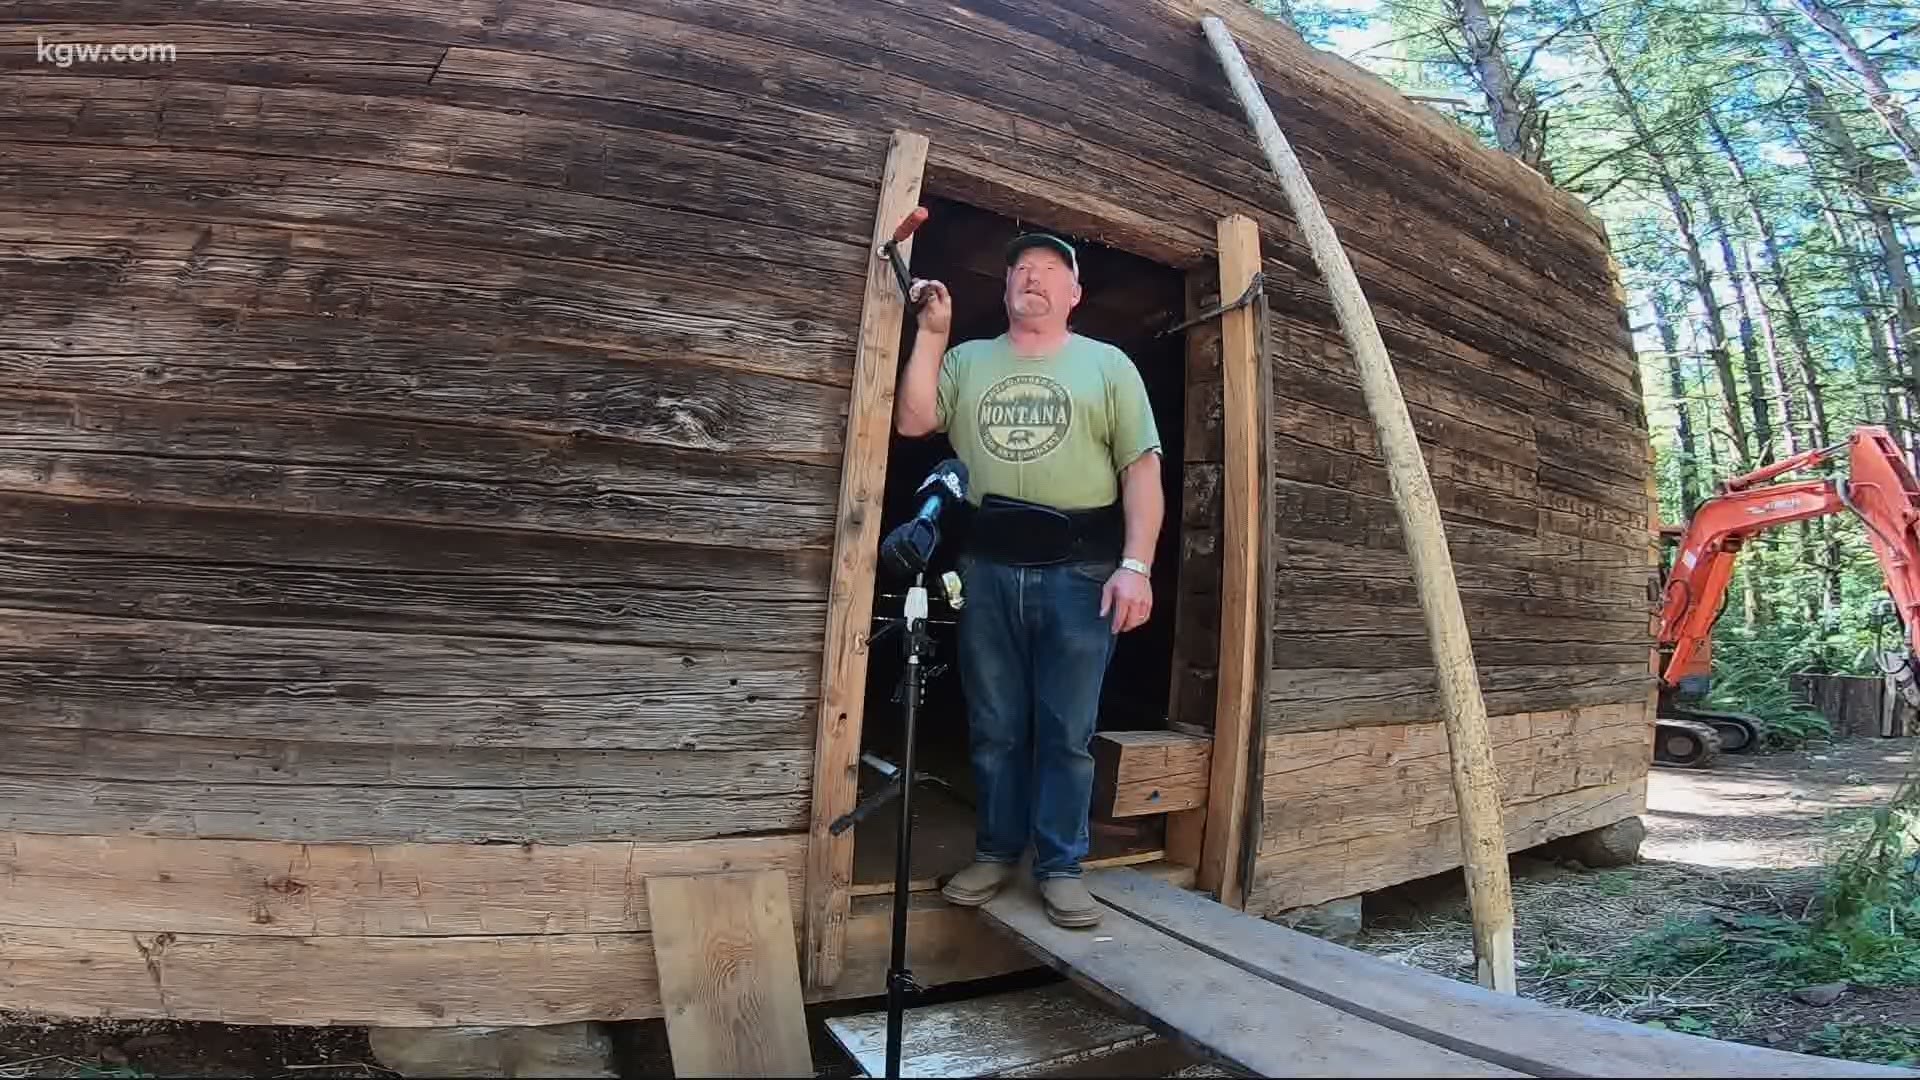 Volunteers and historians are rebuilding a log house in Oregon. Steve Redlin explains how the project could lead to new information about Oregon’s history.